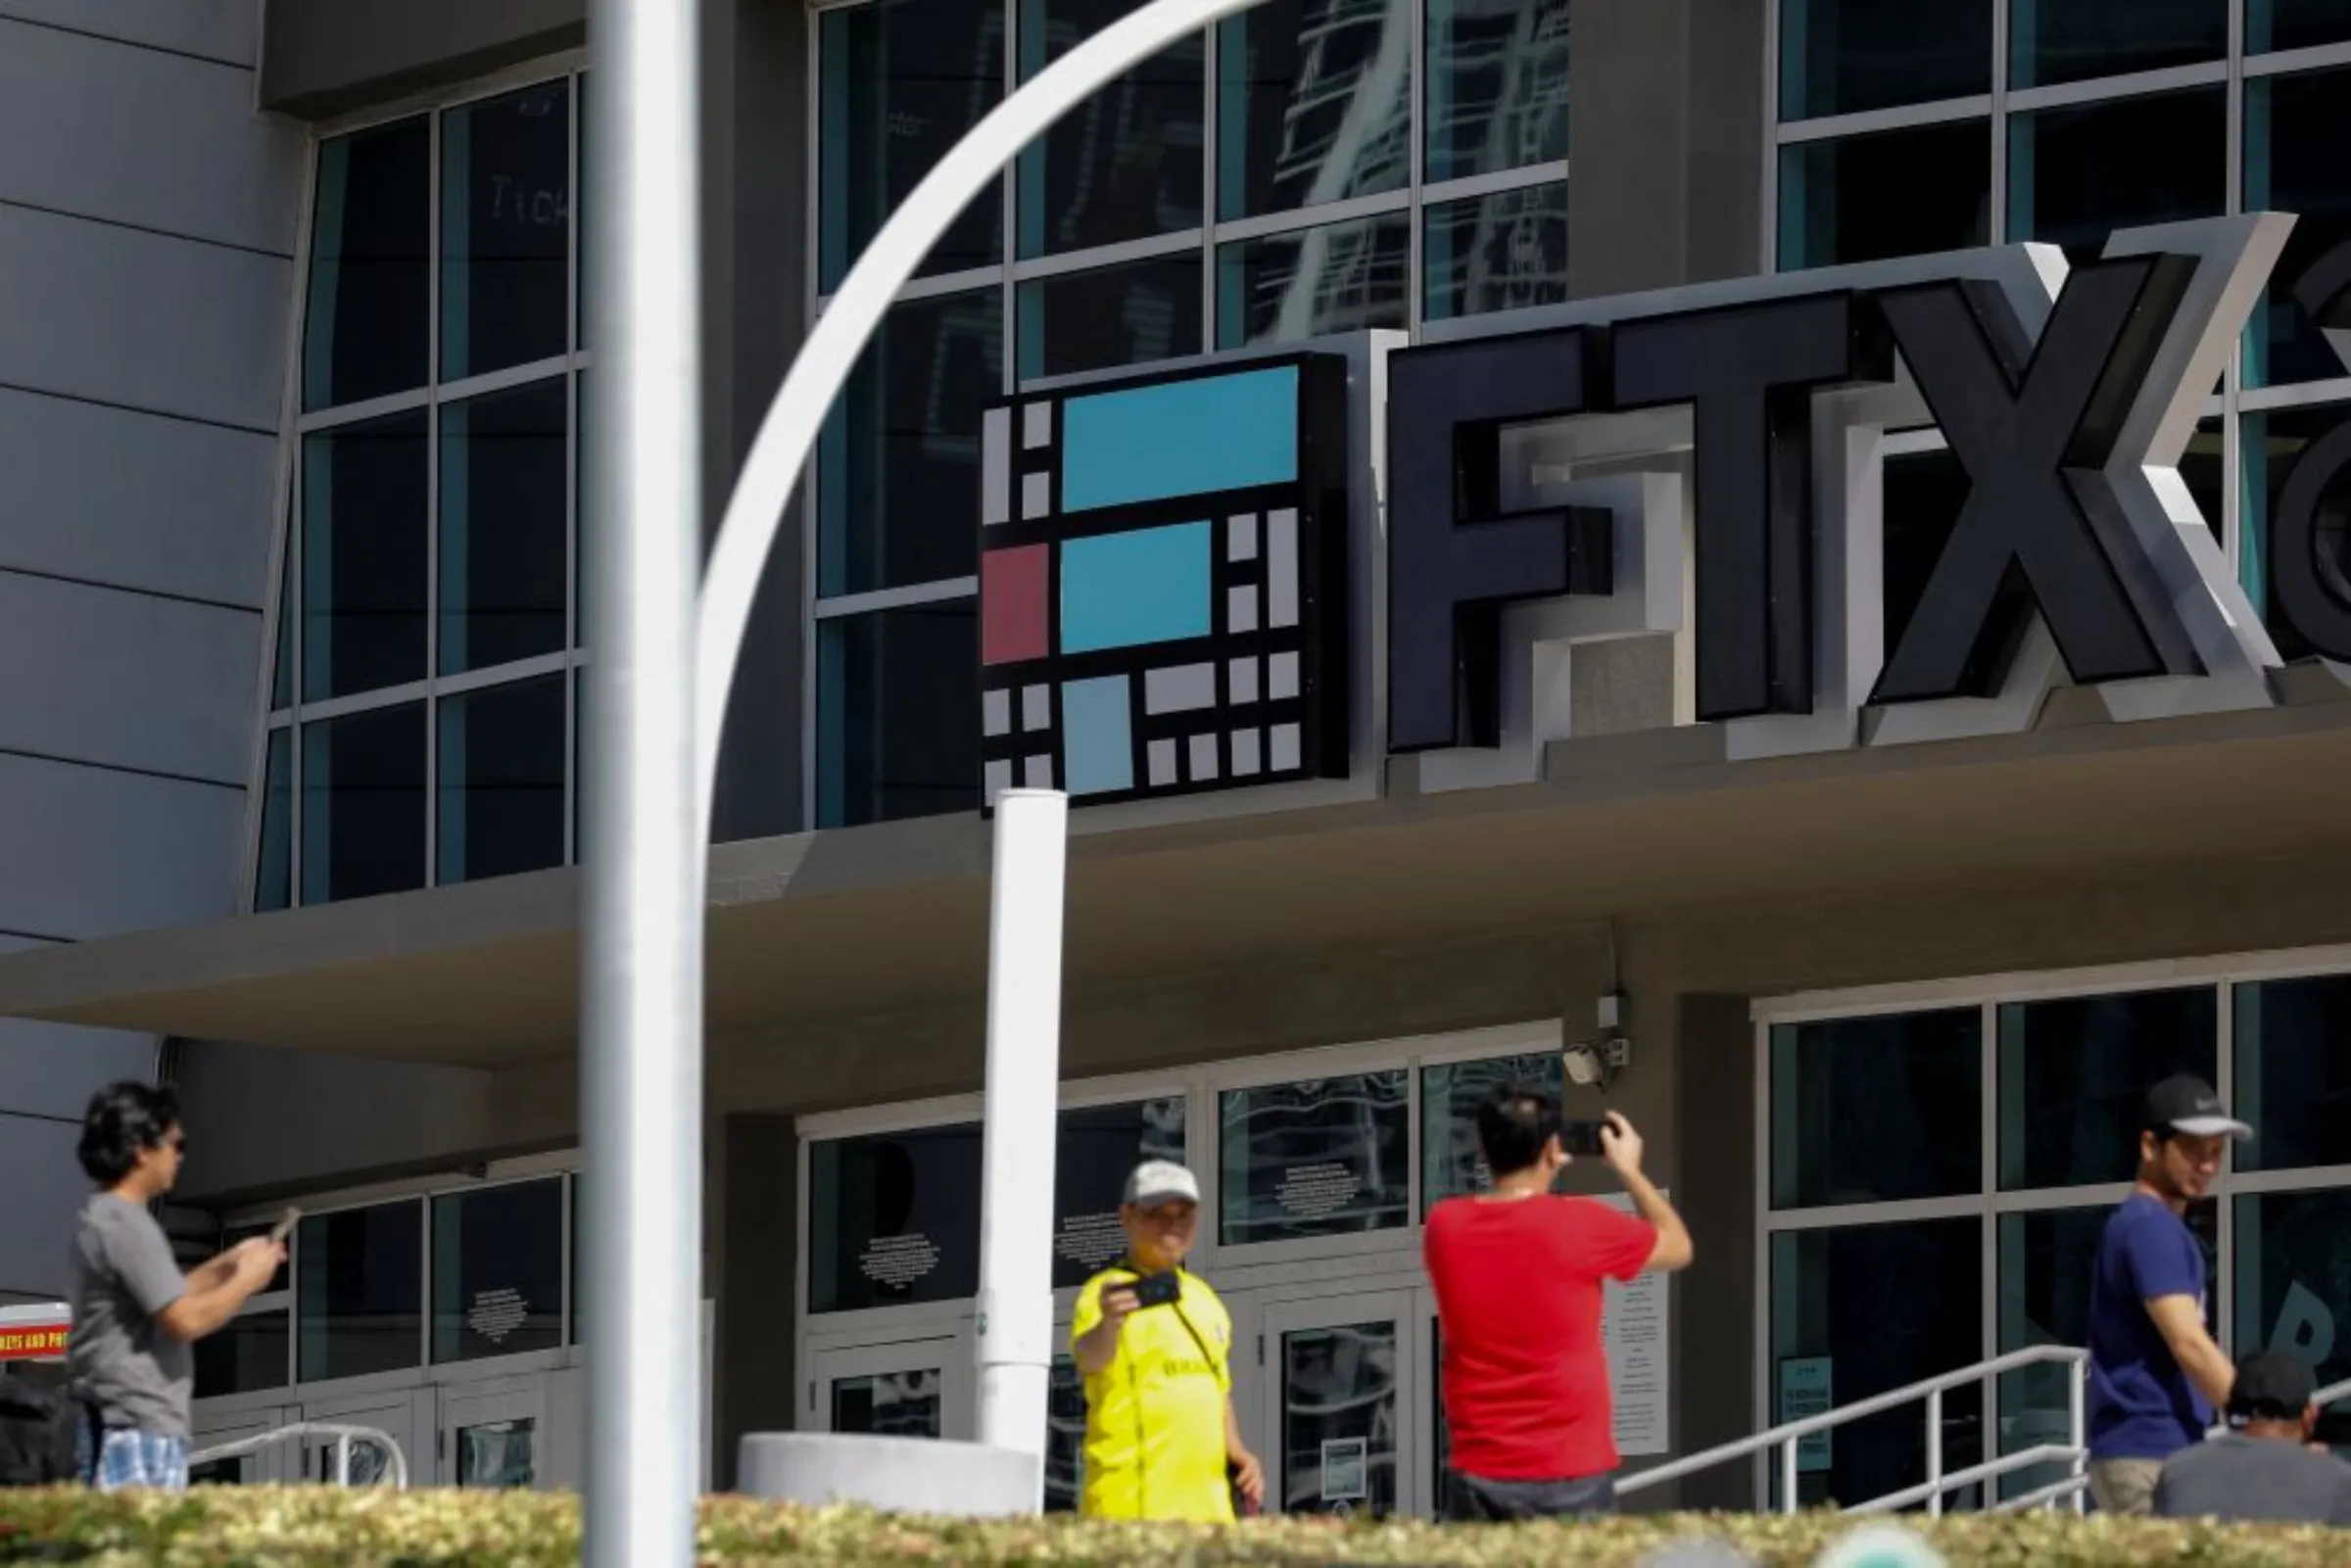 The logo of FTX is seen at the entrance of the FTX Arena in Miami, Florida, U.S., November 12, 2022